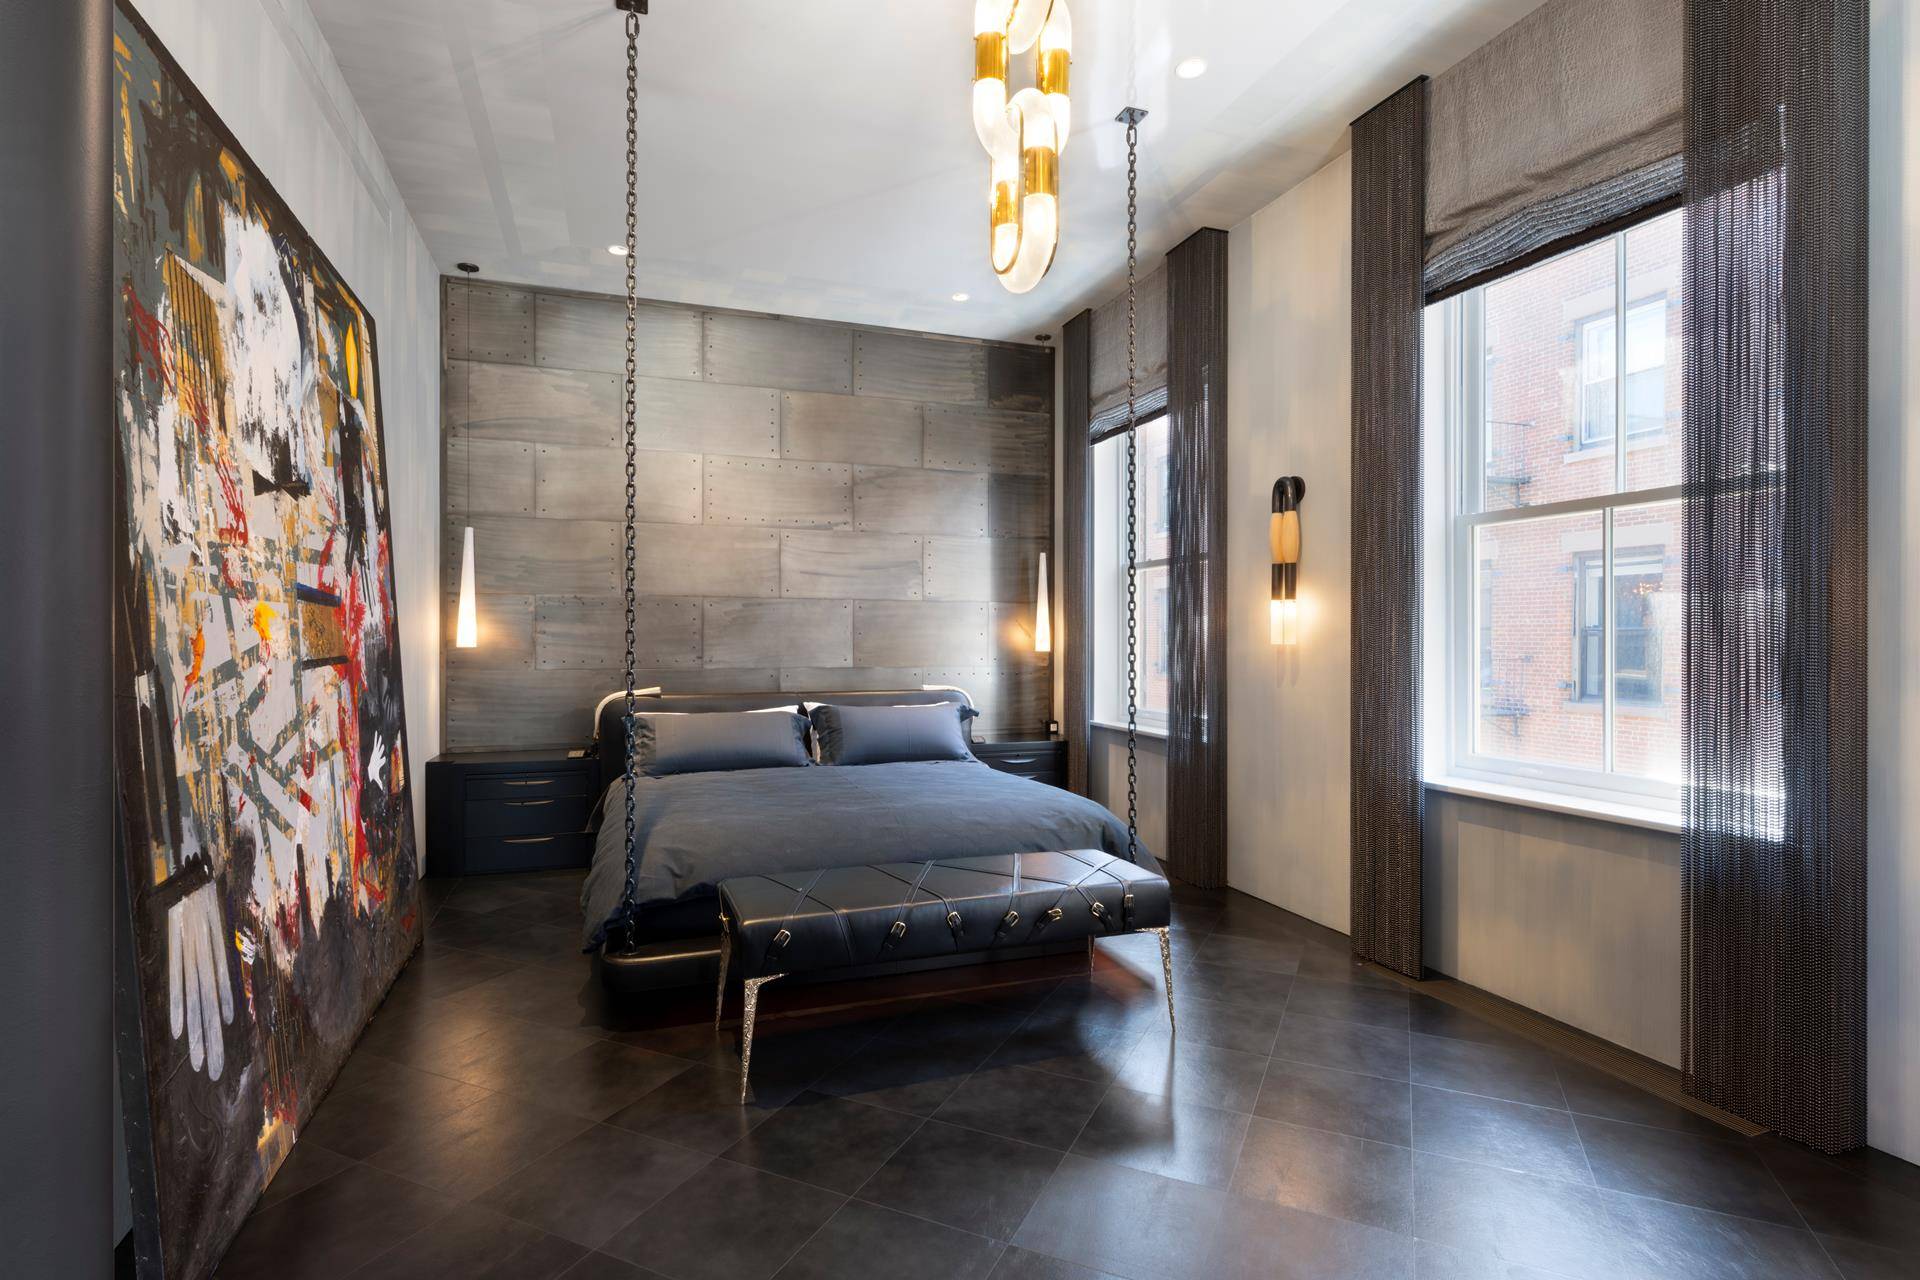 Introducing a one of a kind triplex penthouse with two private outdoor rooftop terraces in a boutique condo within the fabled SoHo Cast Iron Historic District.